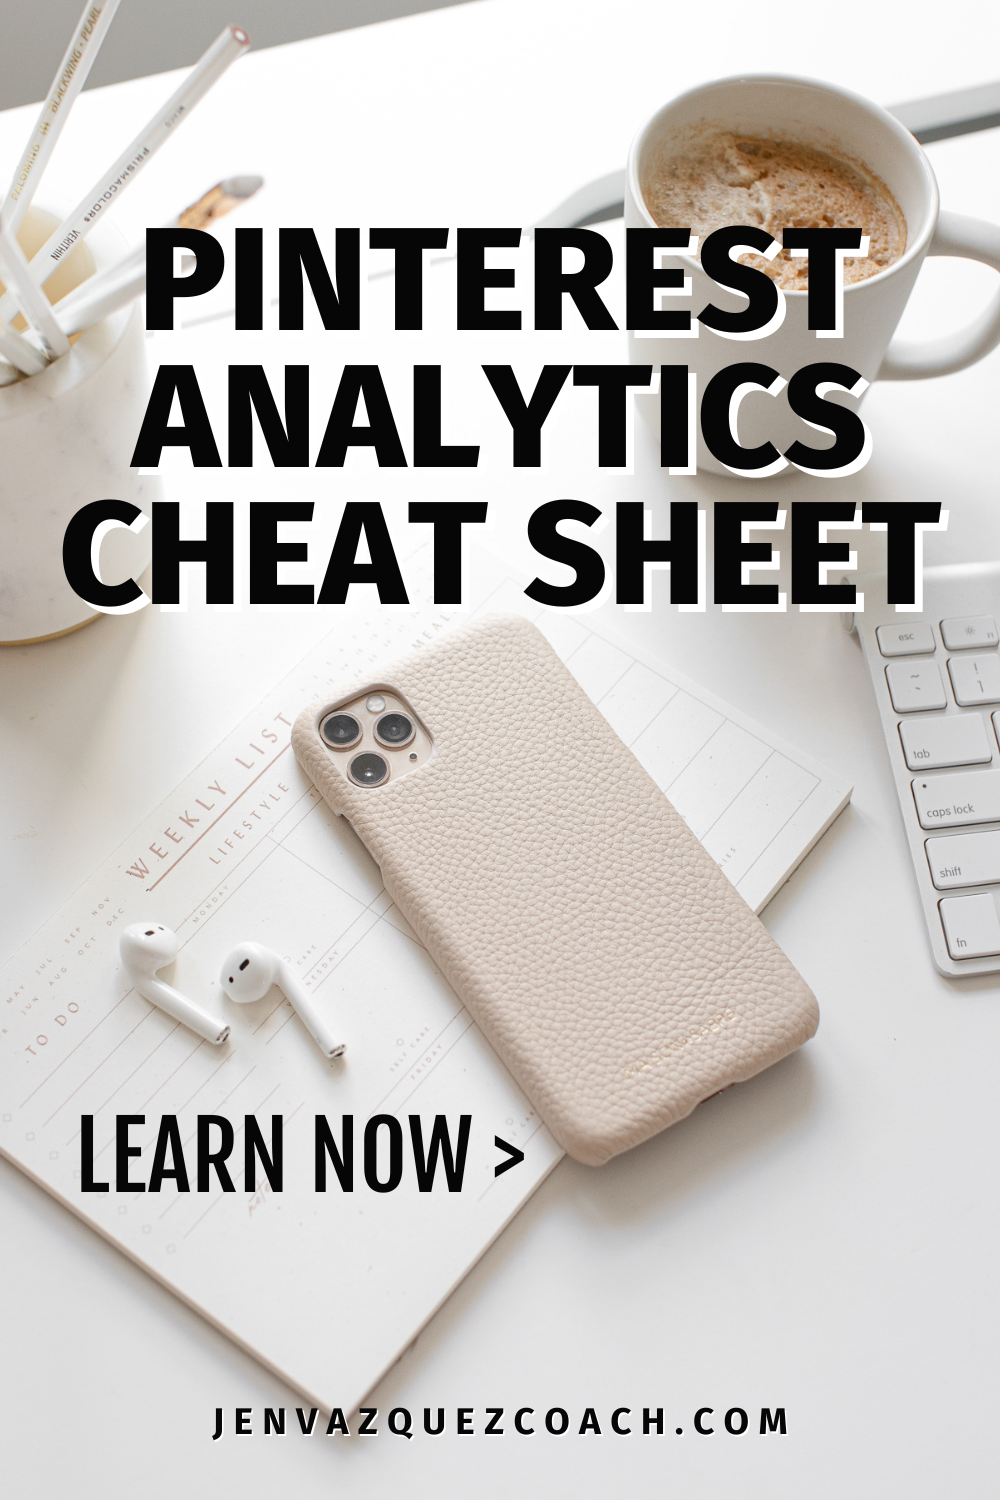 Desk with beige cell phone holder, keyboard, ear budgs and writing saying Pinterest Analytics Cheat Sheet